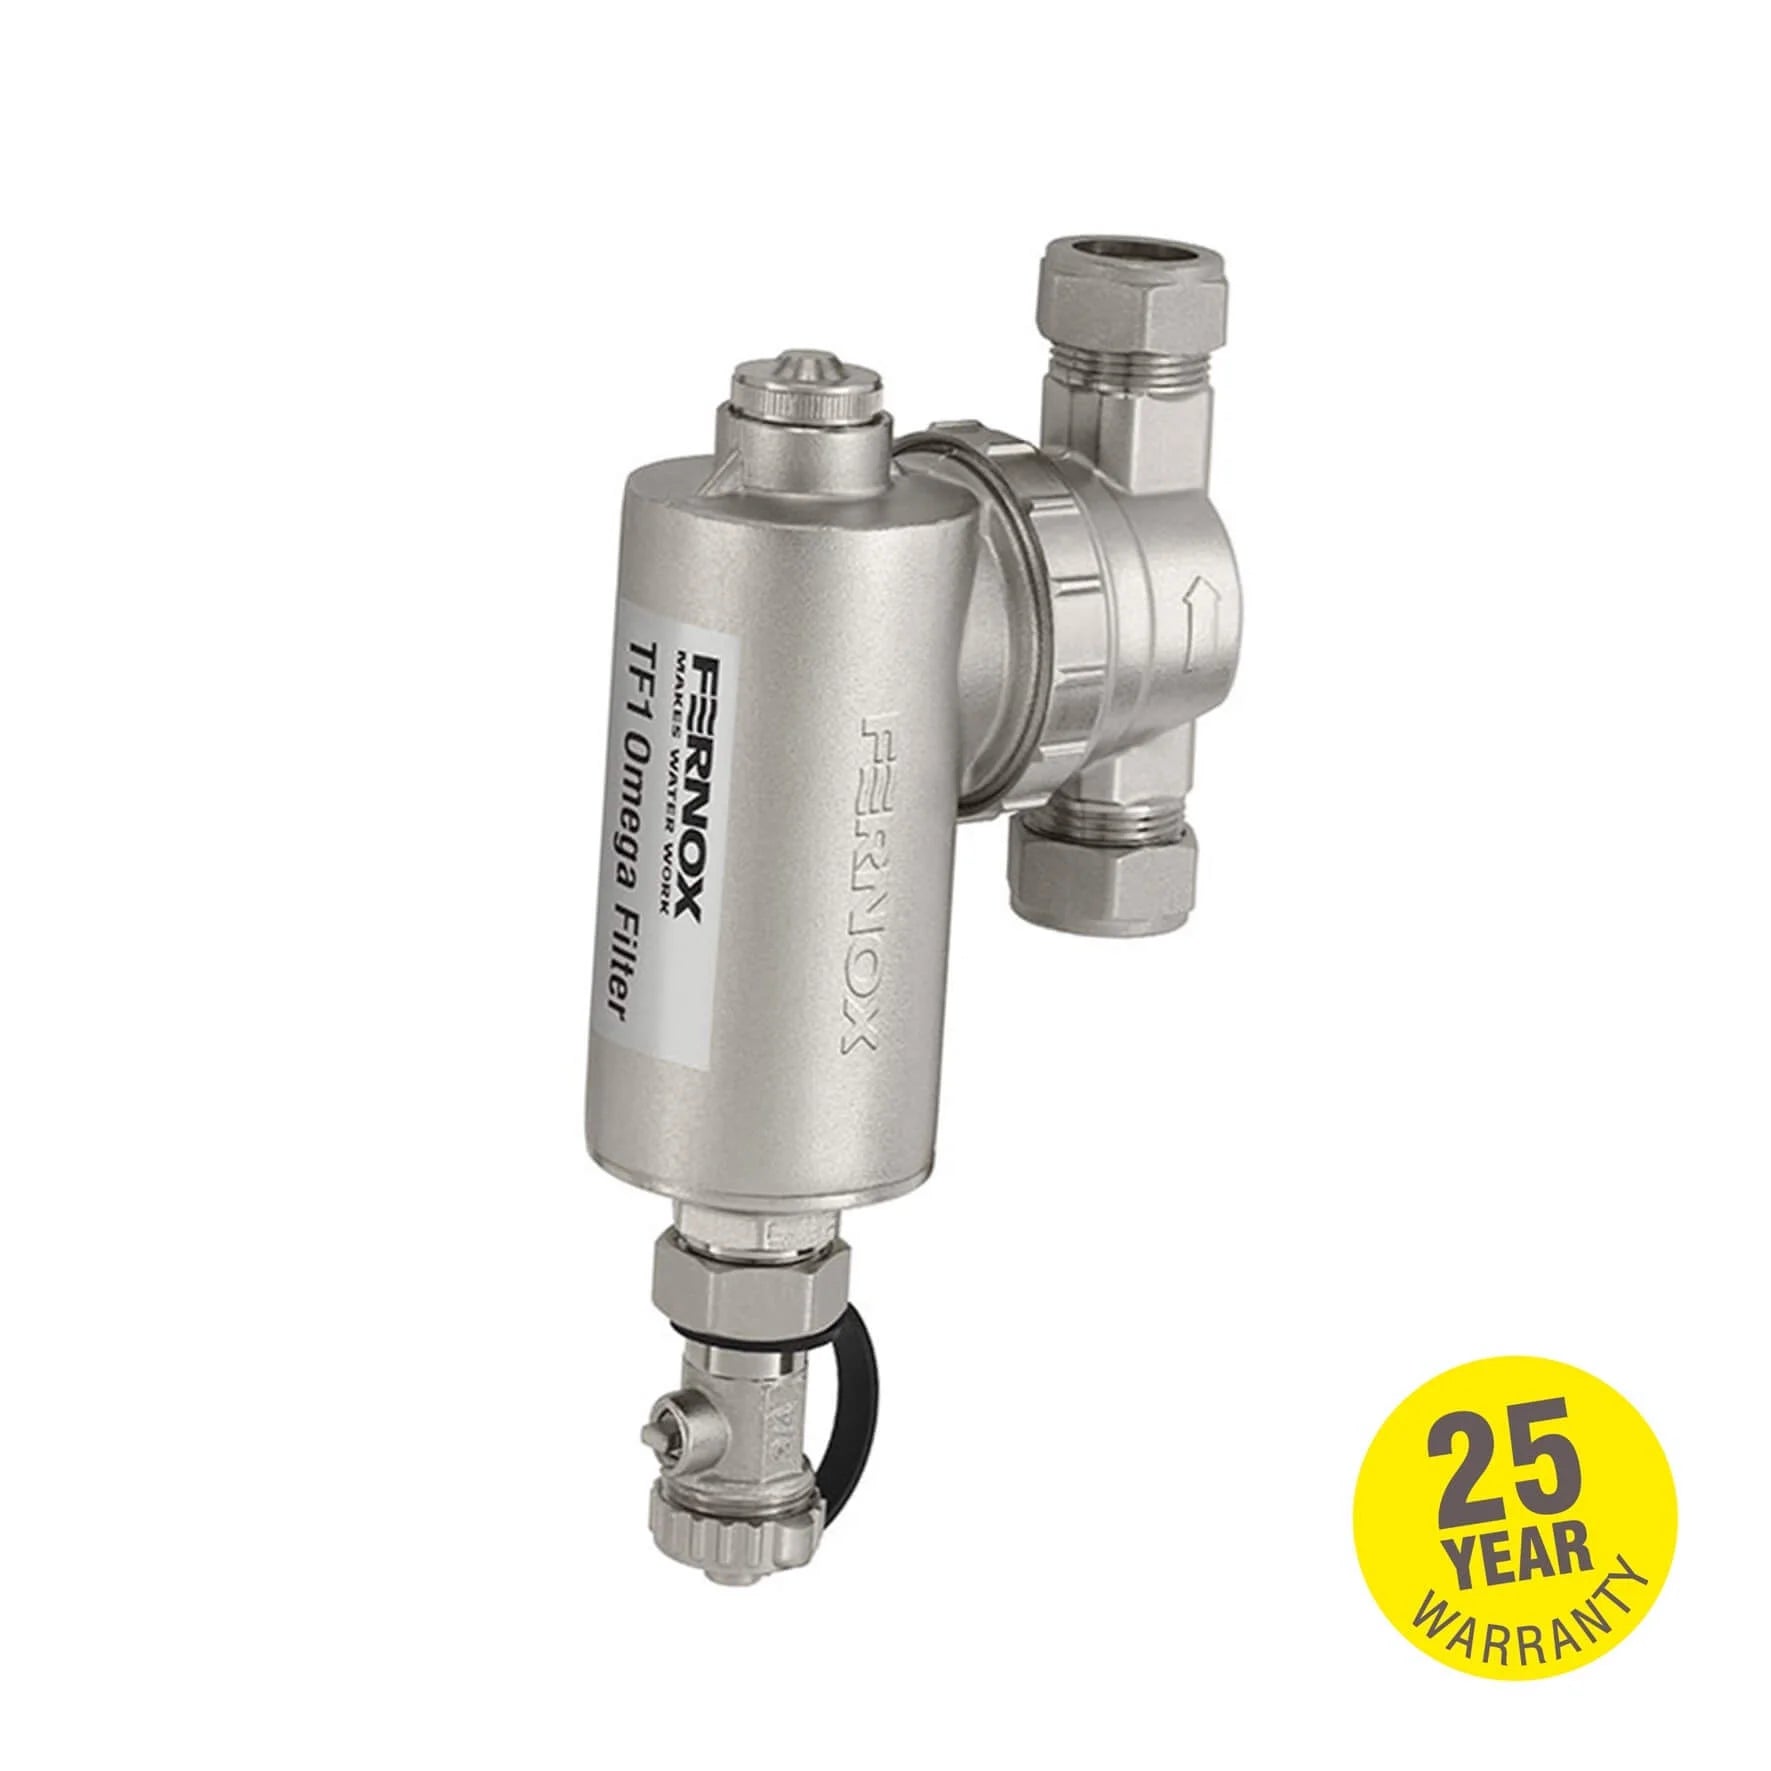 Fernox TF1 Omega Central Heating Filter with 22mm Slip Connections | 62248 | Fairspot UK